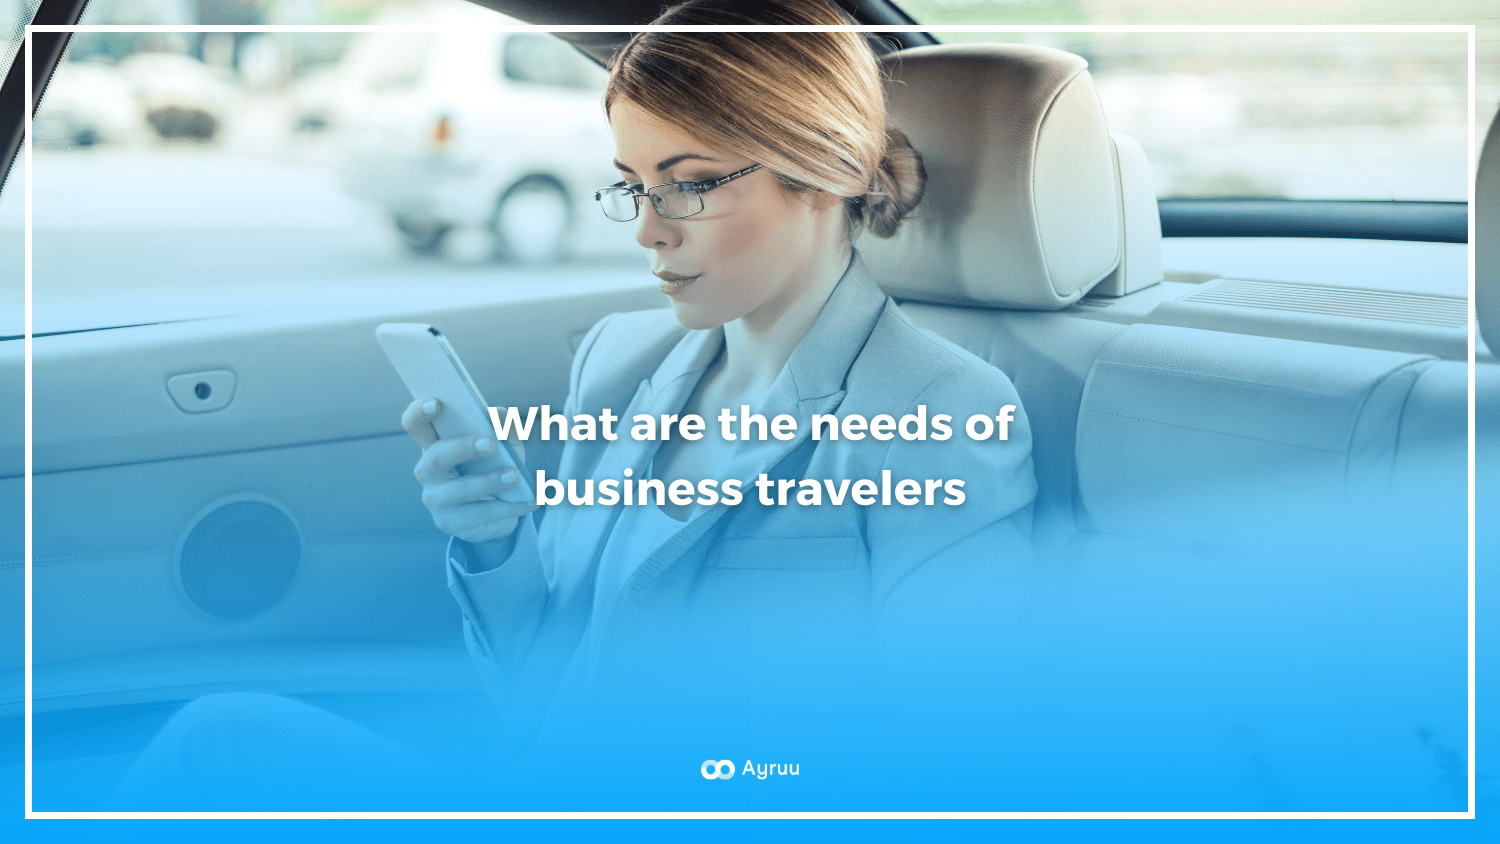 What are the needs of business travelers